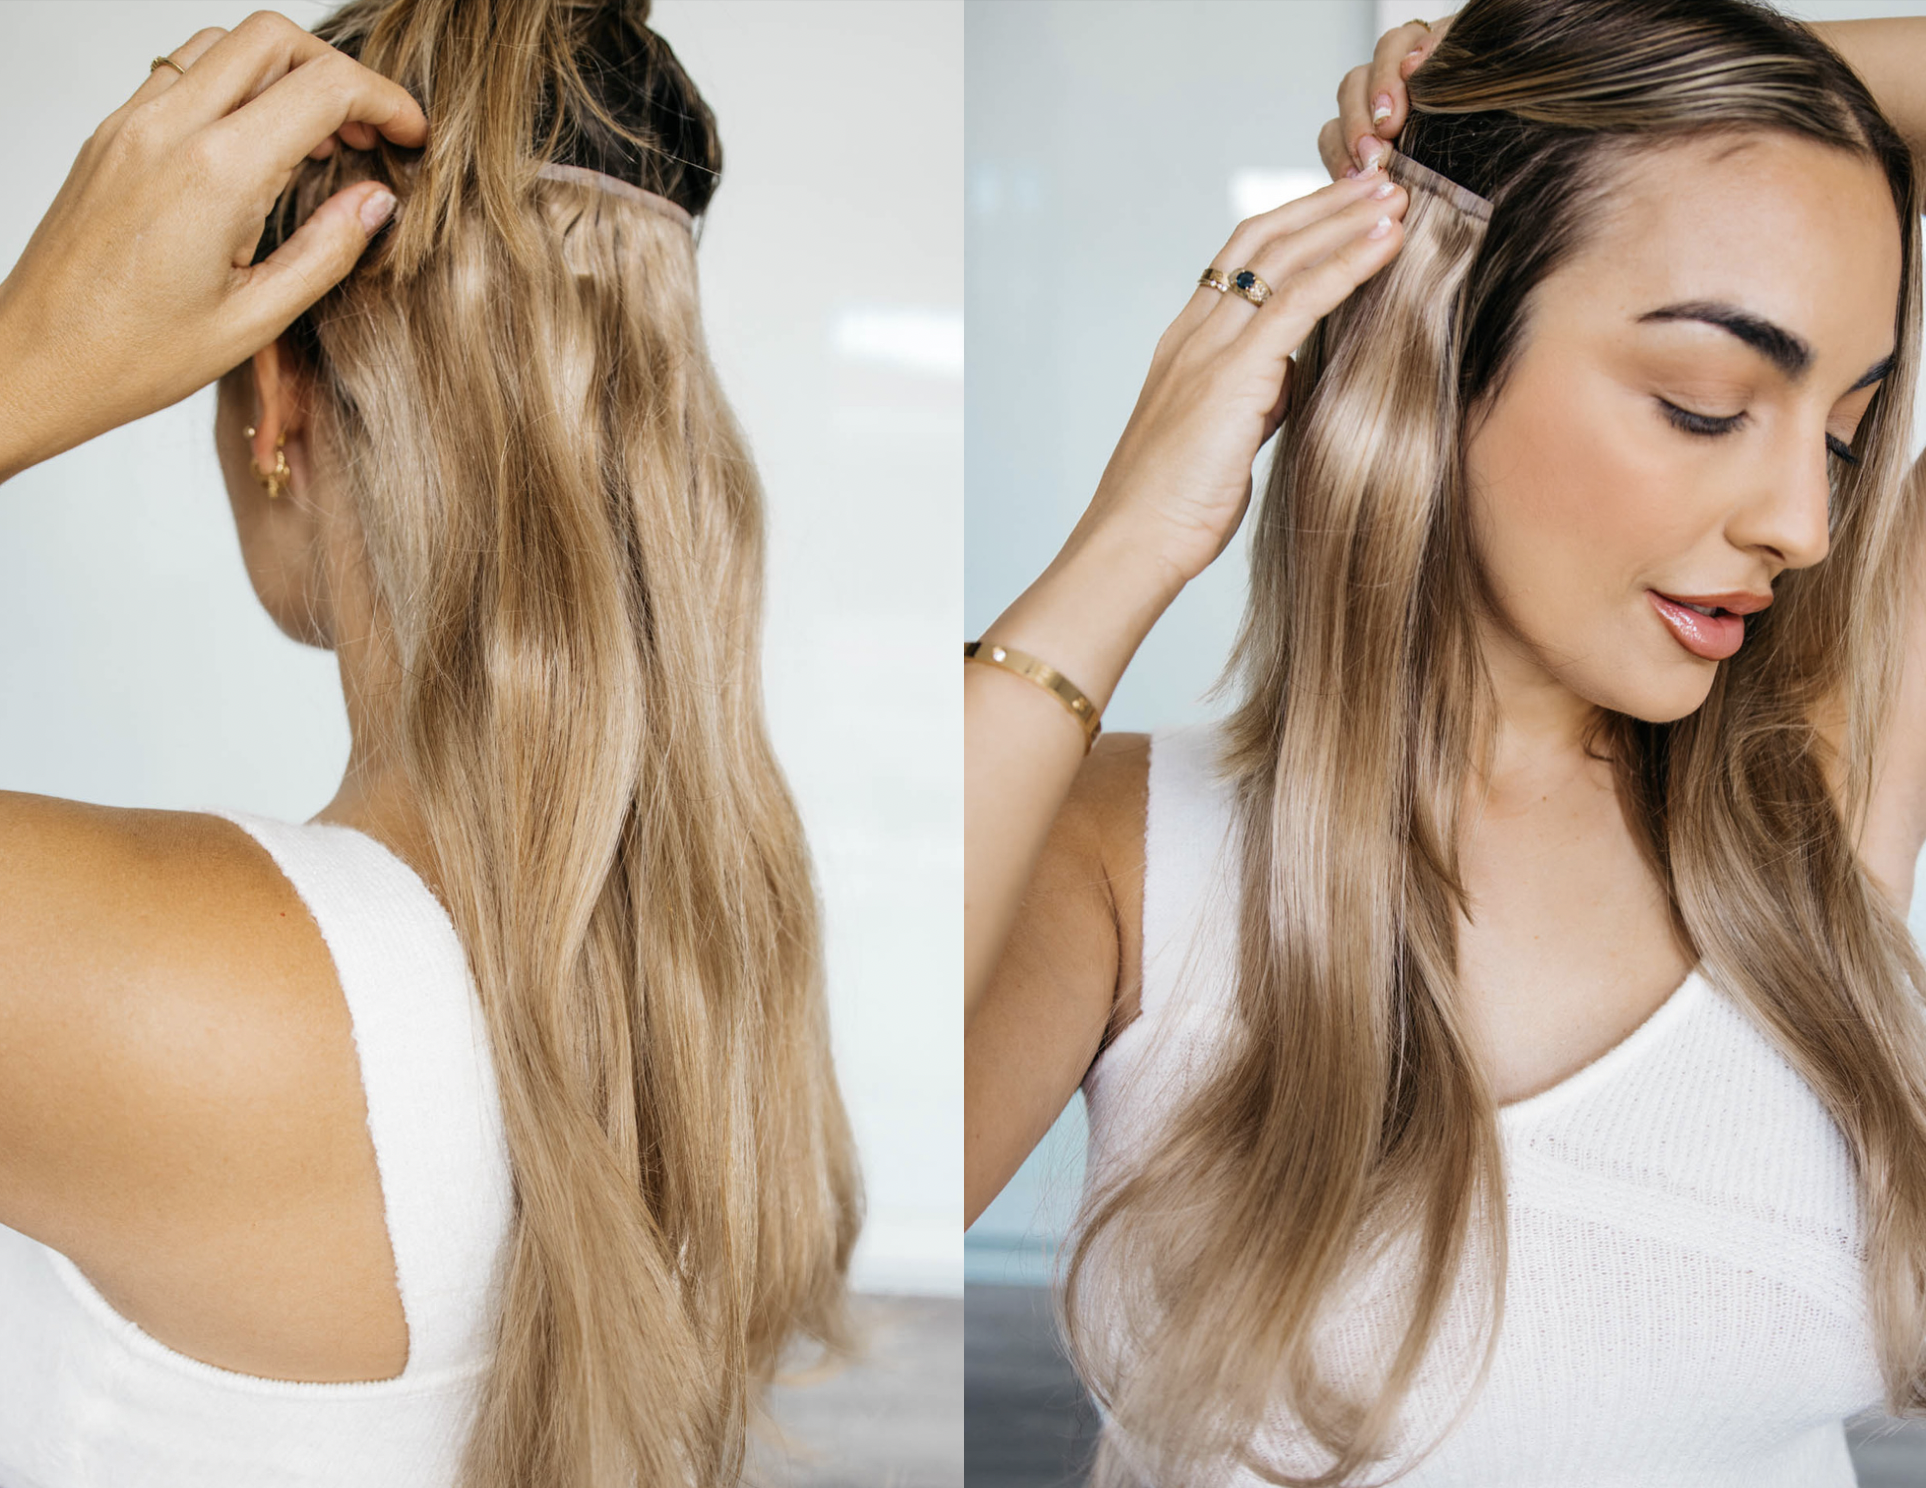 What Hair Extensions Are Best For Thin Hair? - CASHMERE HAIR